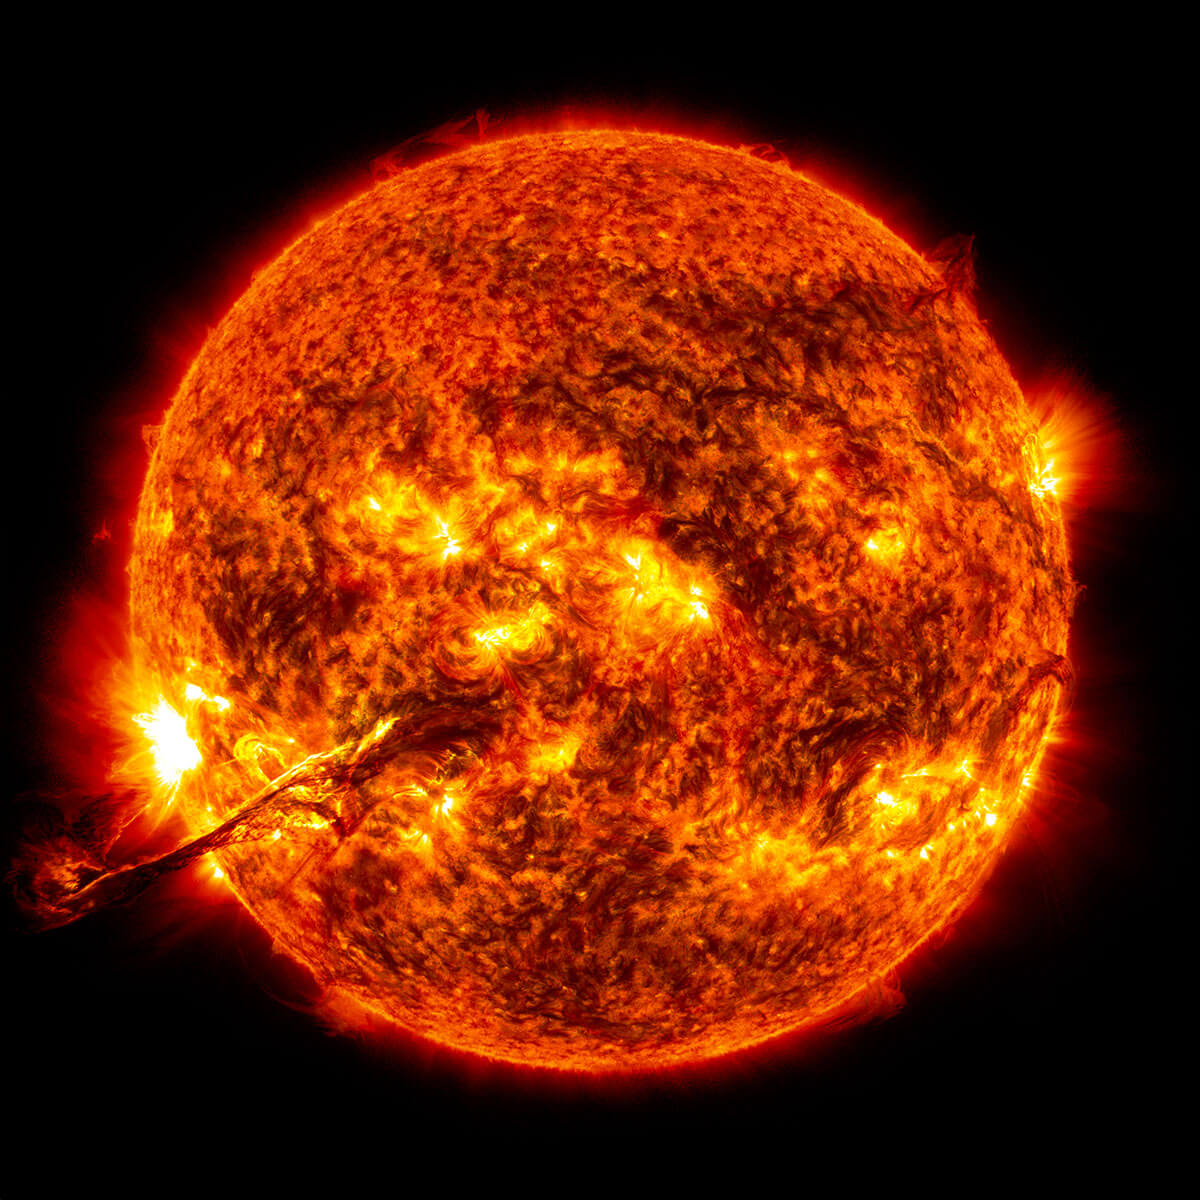 Image of the Sun with a finger-like object at its bottom left. This is a coronal mass ejection.